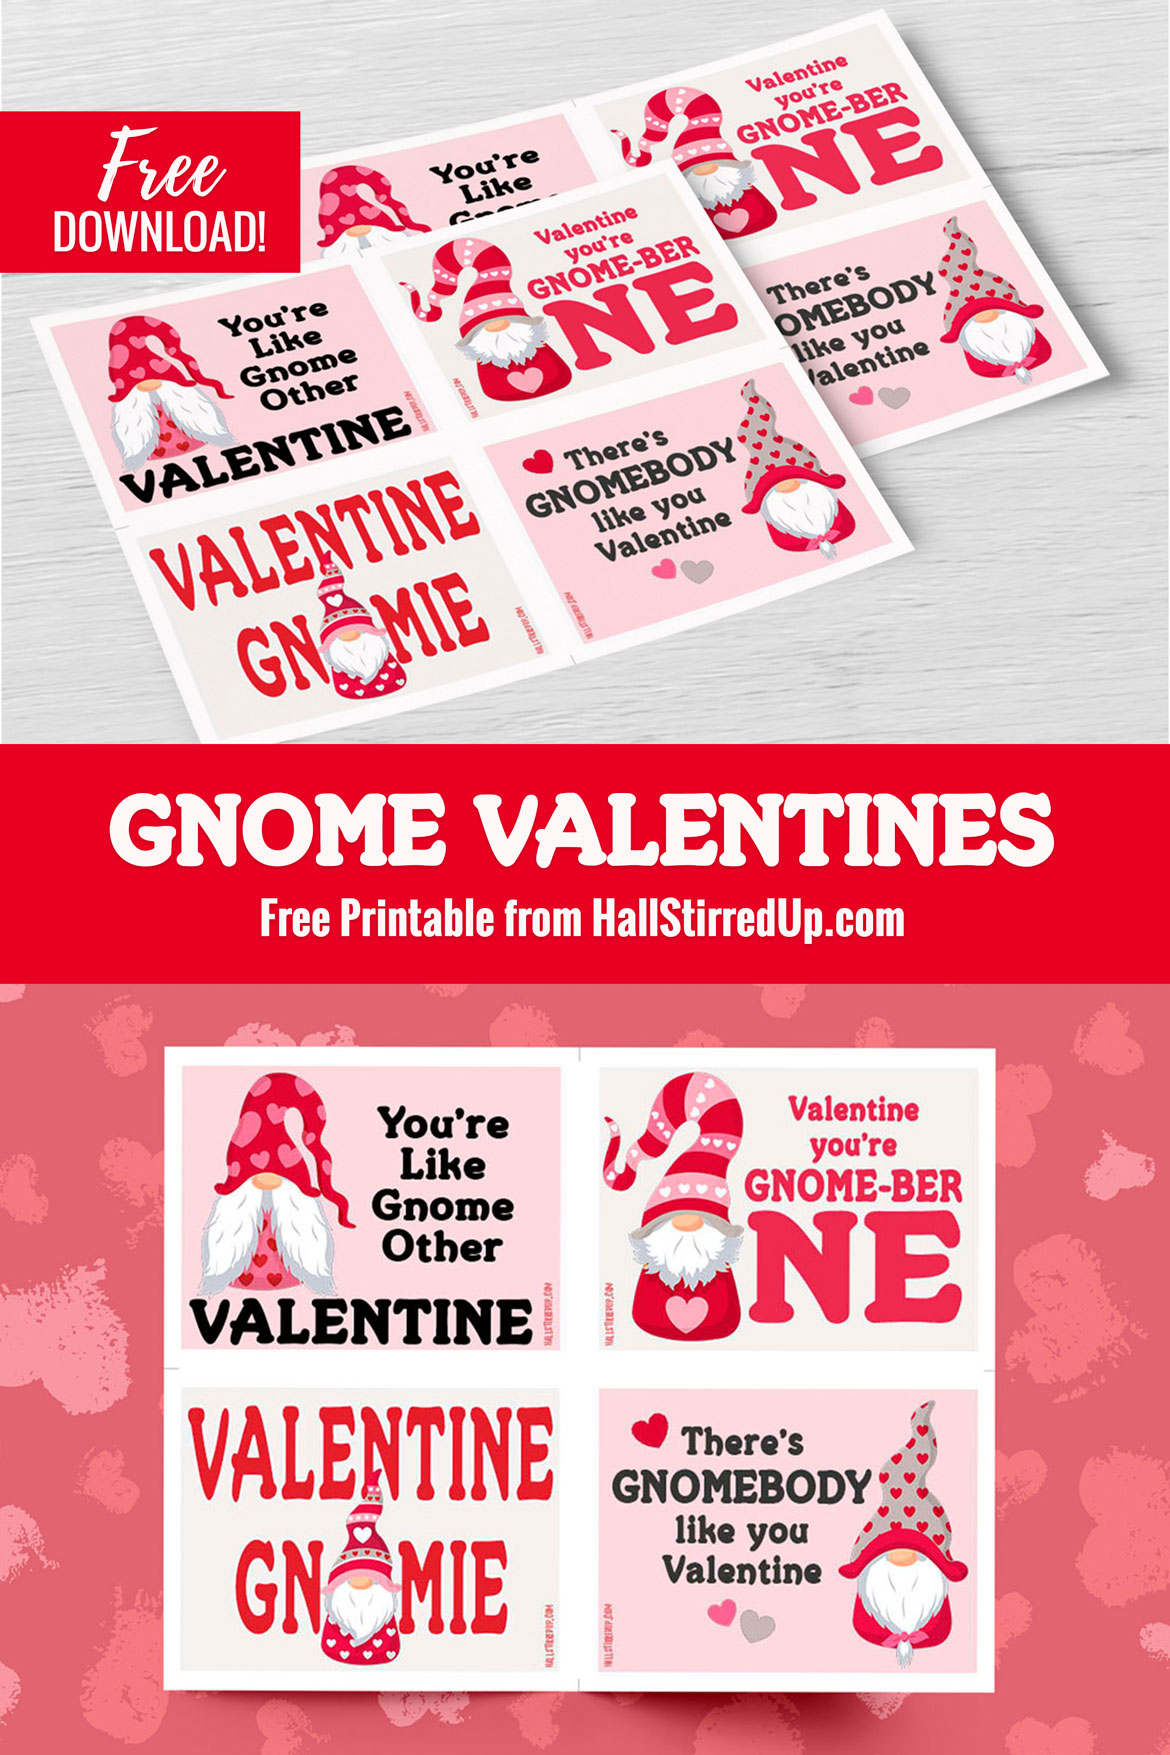 I GNOME you'll love these free printable Valentines